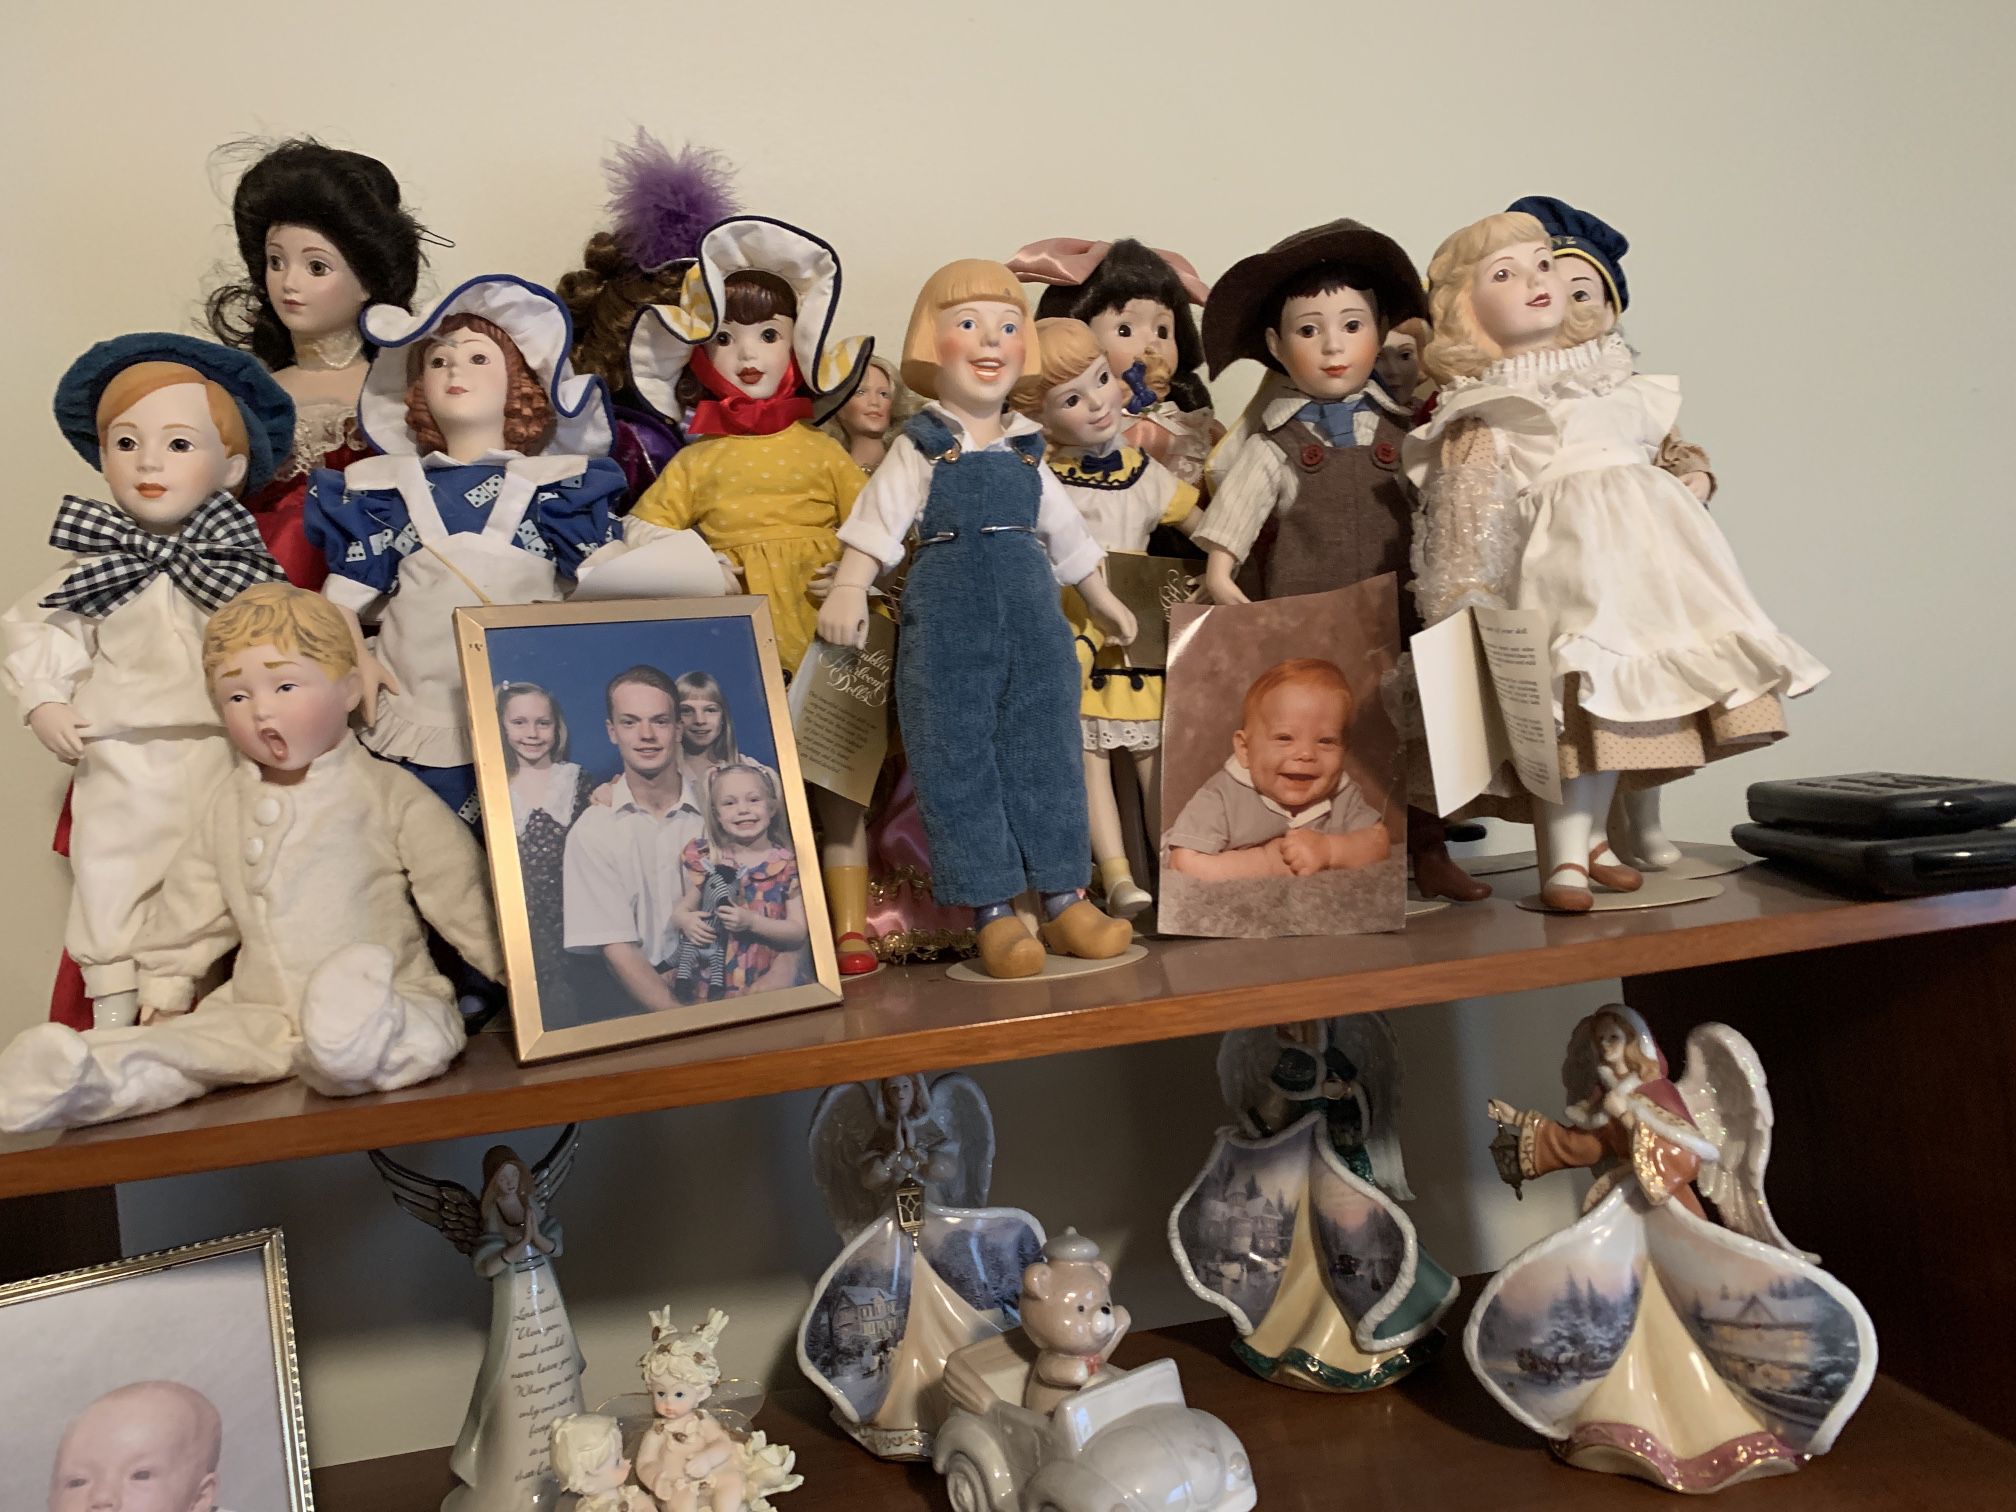 Vintage Doll Collection